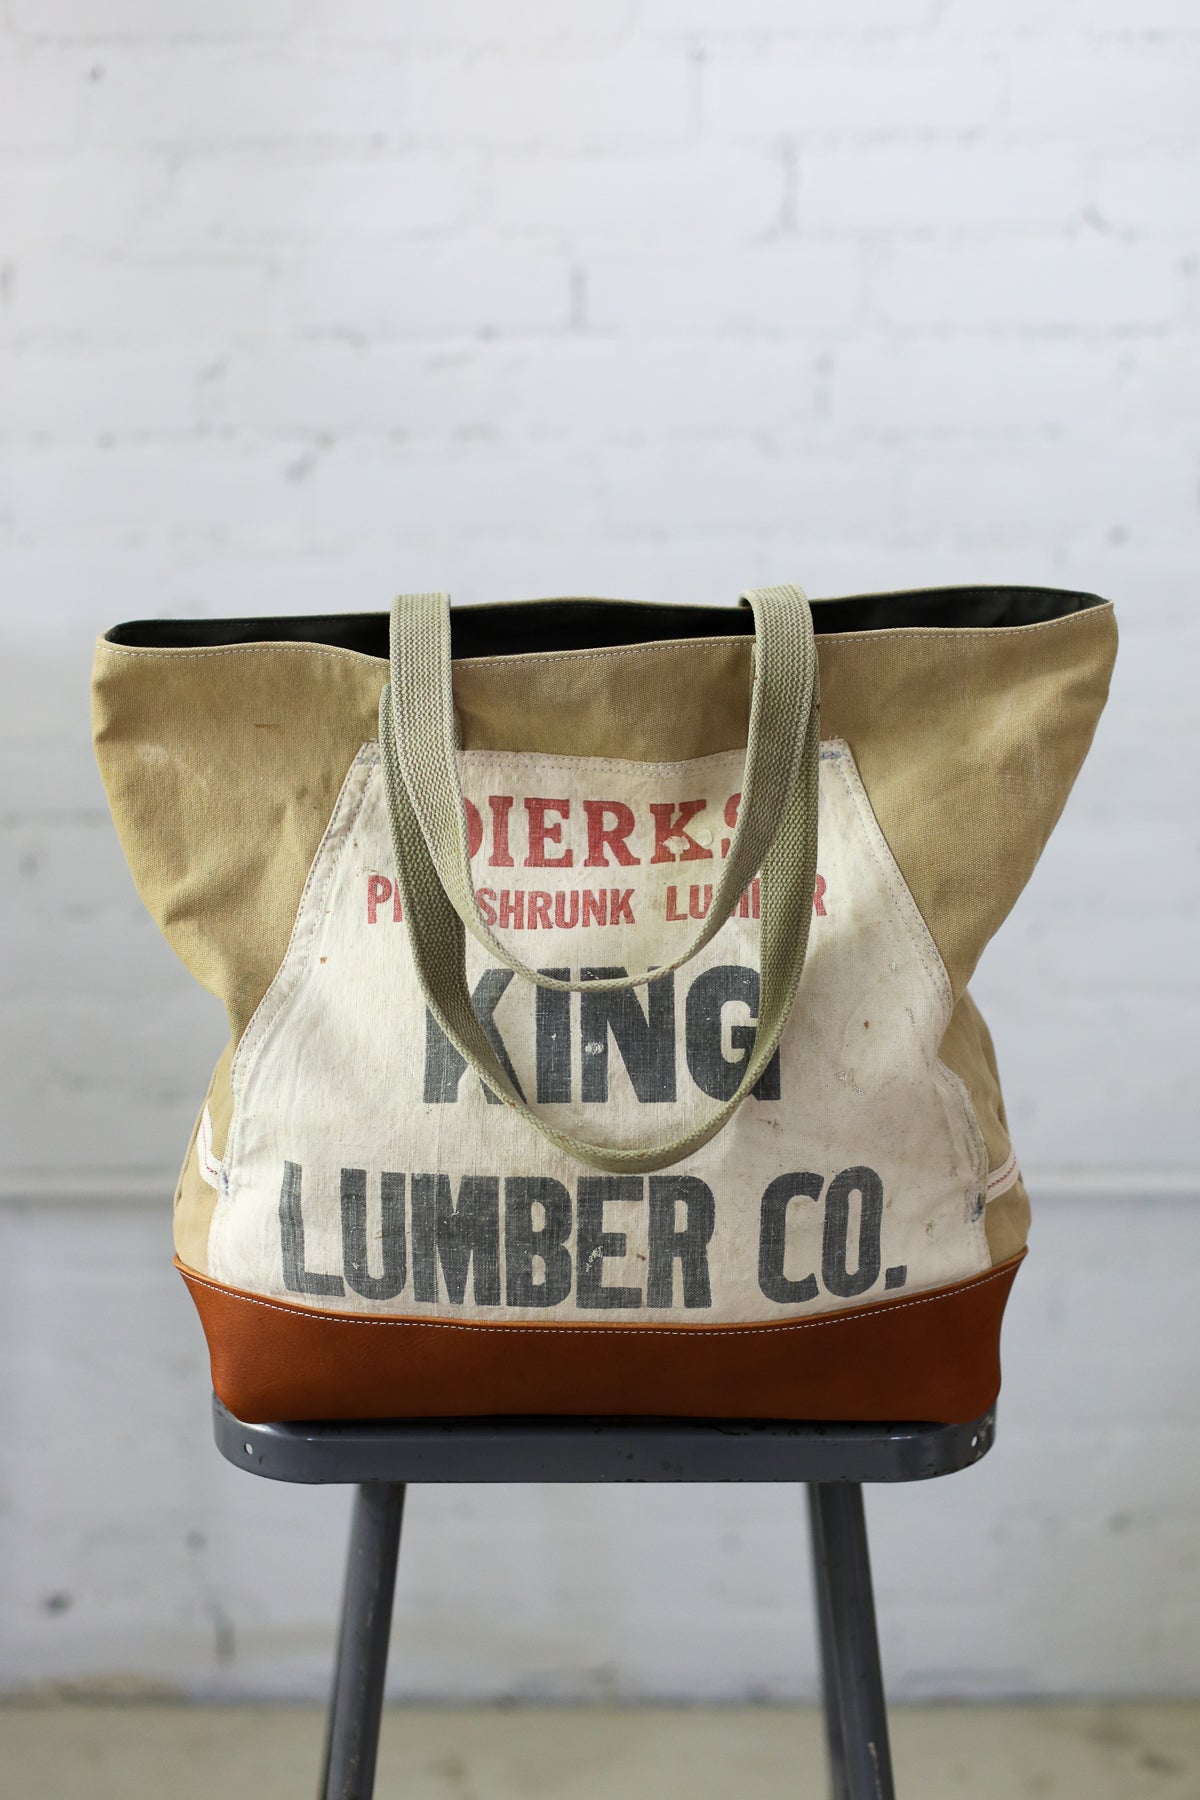 WWII era Salvaged Canvas and Lumber Apron Tote Bag